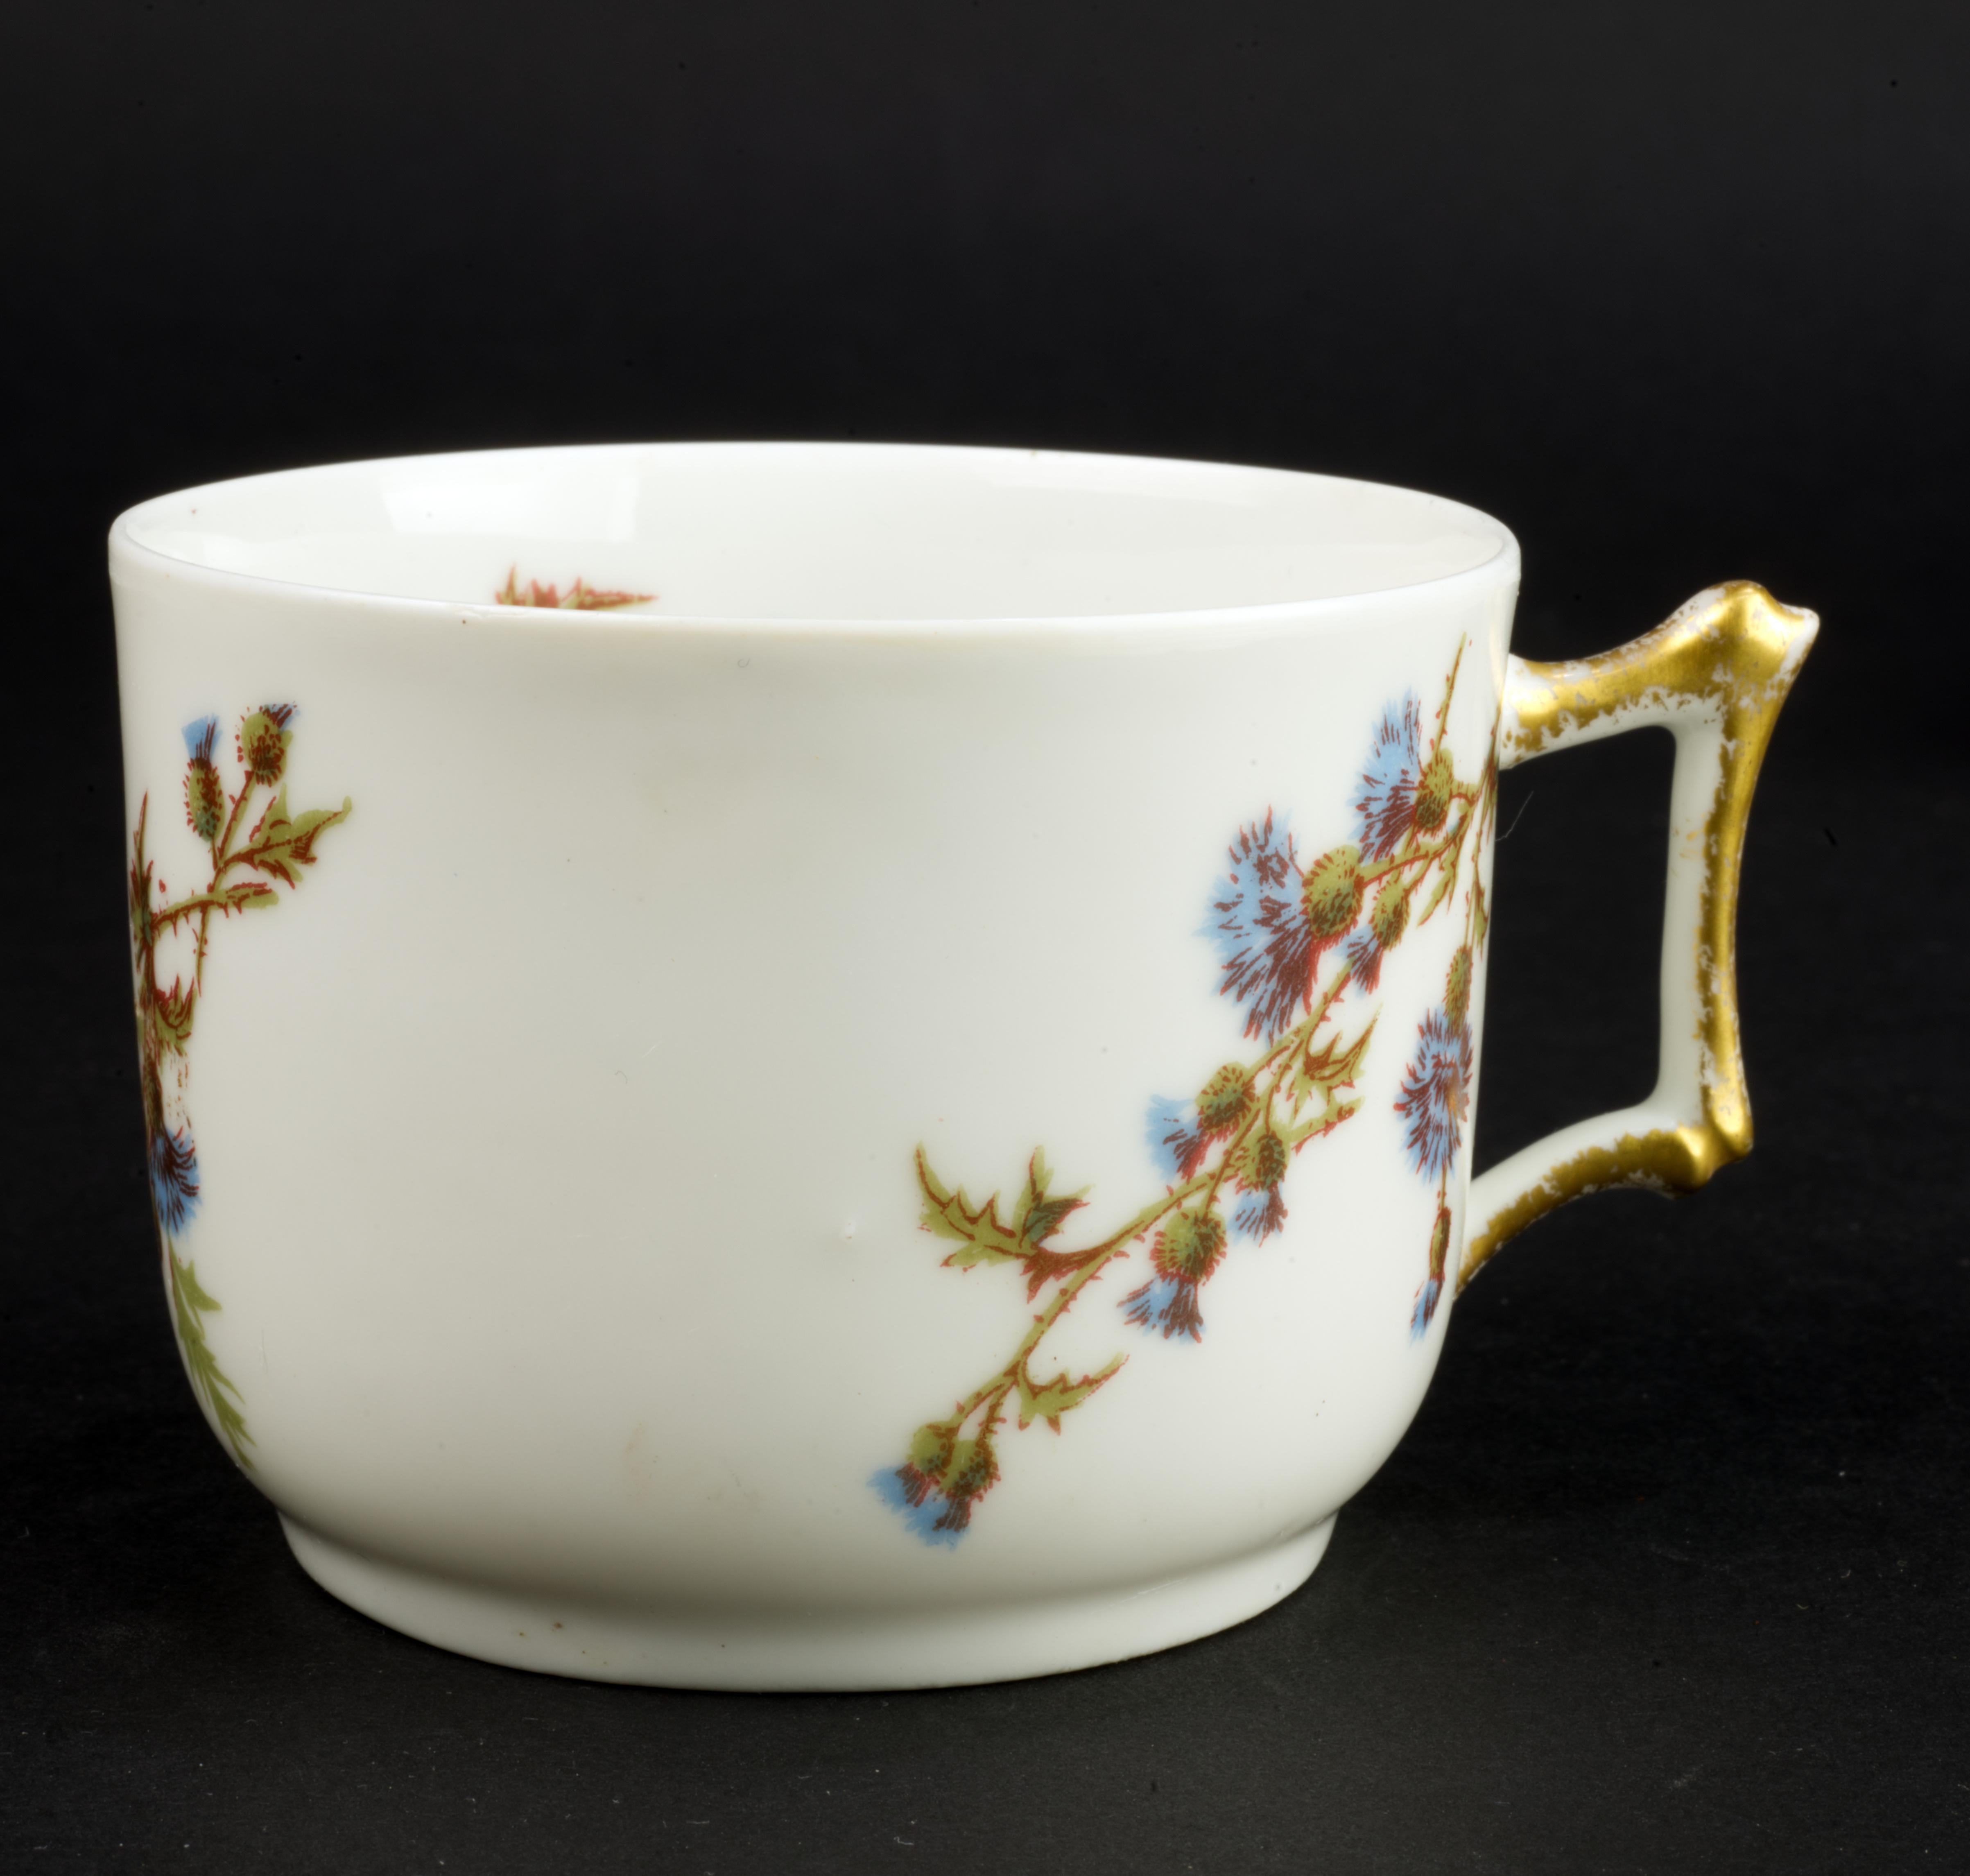 Guerin &Co Limoges France Set of 3 Cups and Saucers Bone China, 1891-1900 For Sale 4